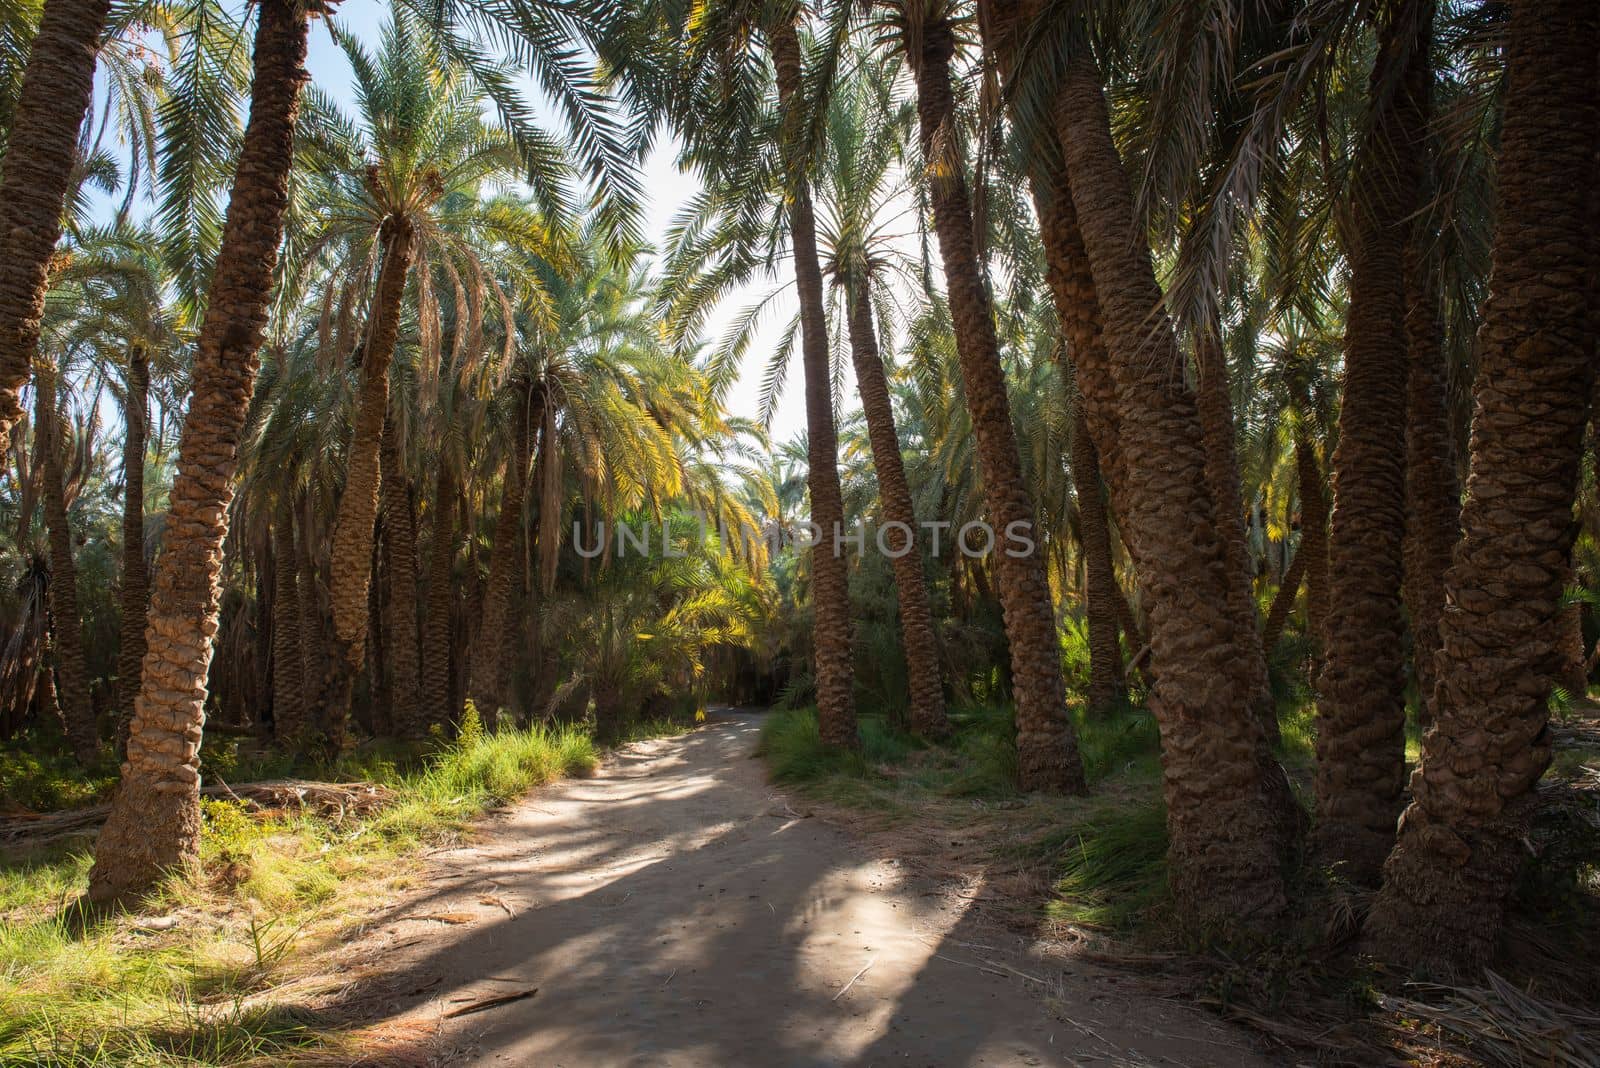 Dirt track road through rural african countryside egyptian date palm tree farm plantation in remote village